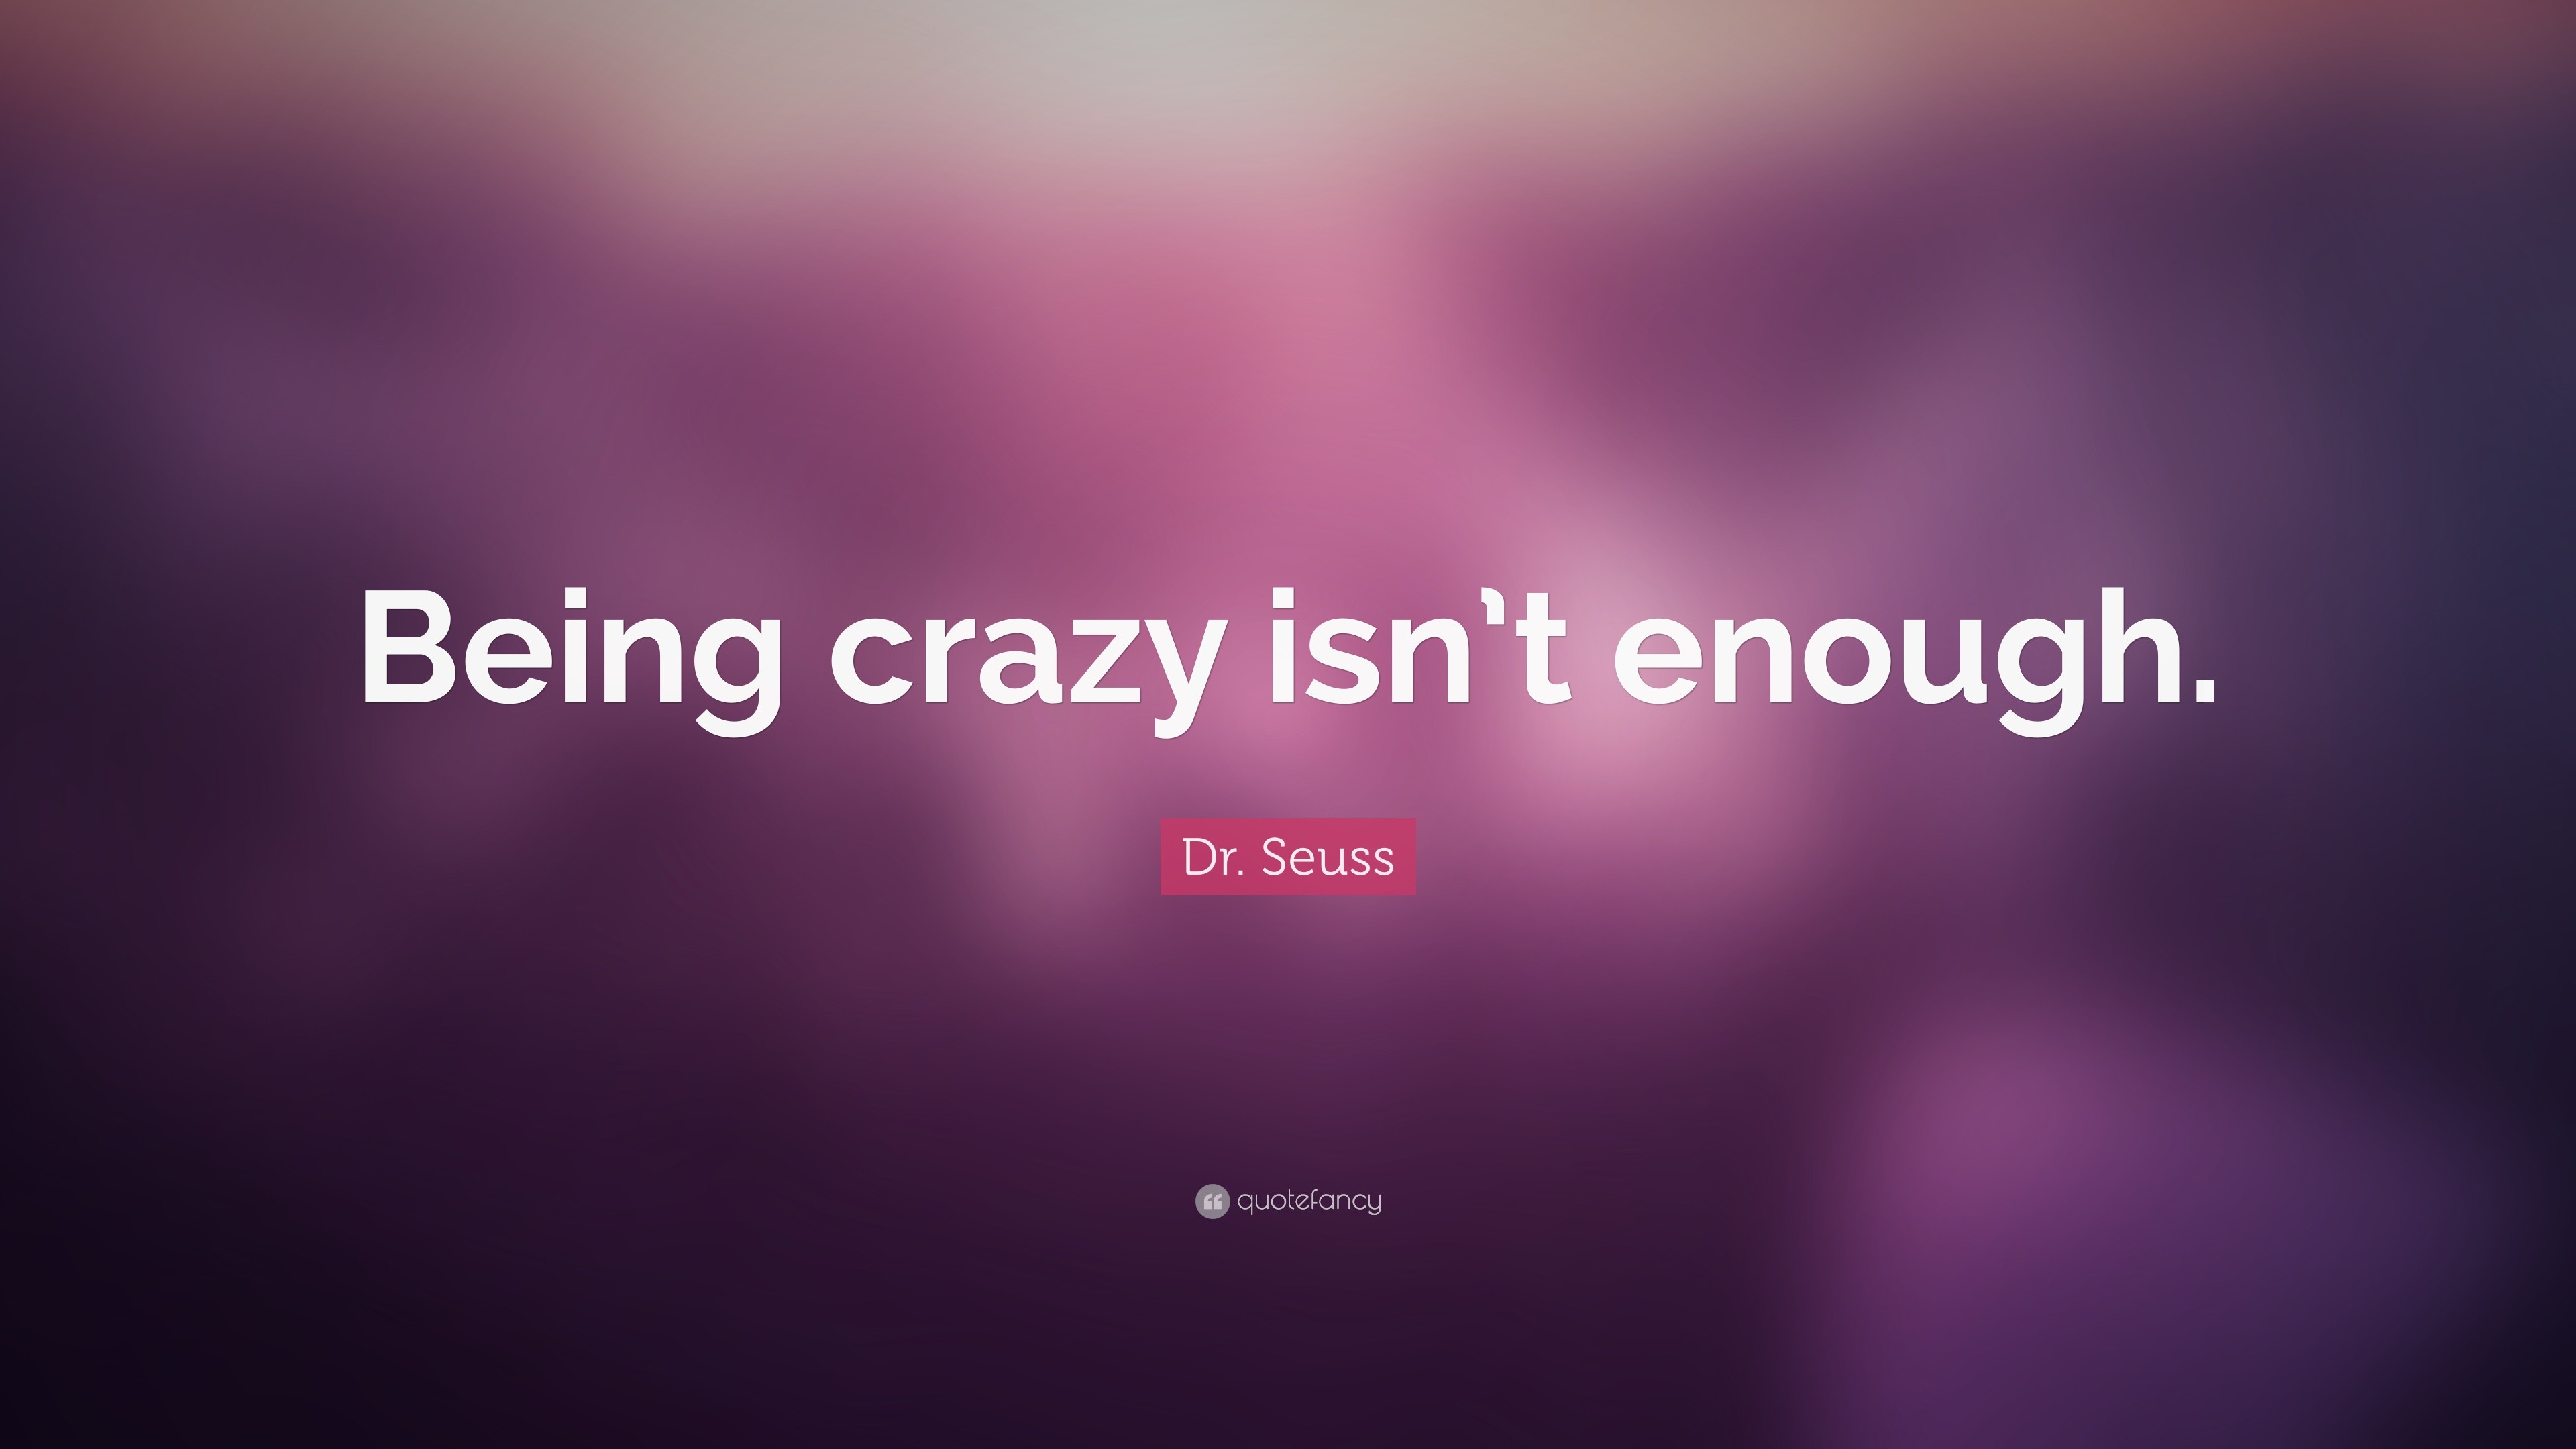 Dr. Seuss Quote: "Being crazy isn't enough." (13 ...